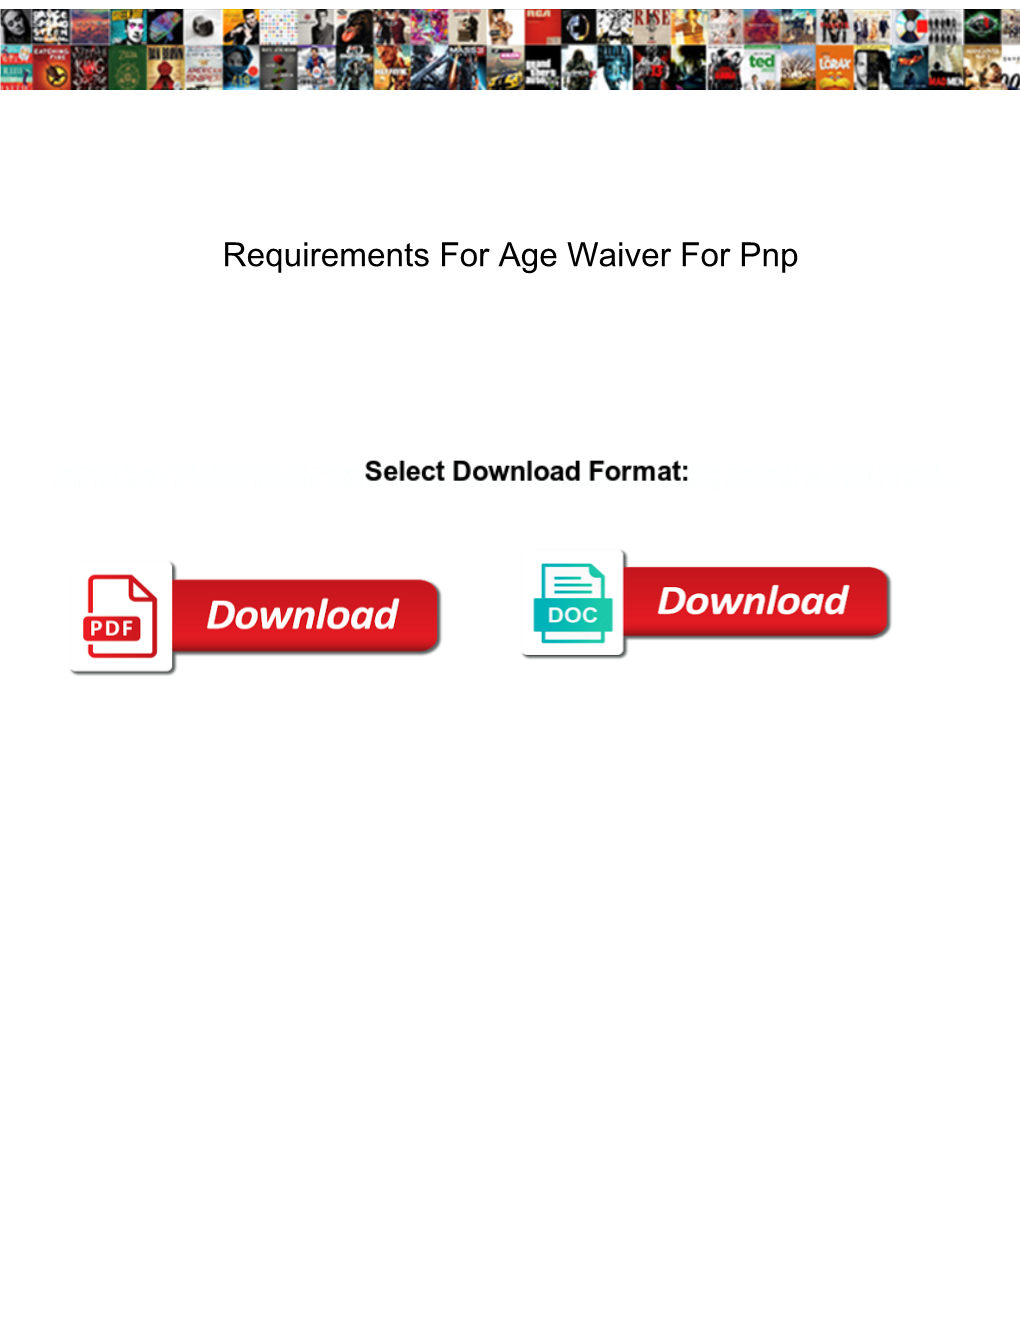 Requirements for Age Waiver for Pnp